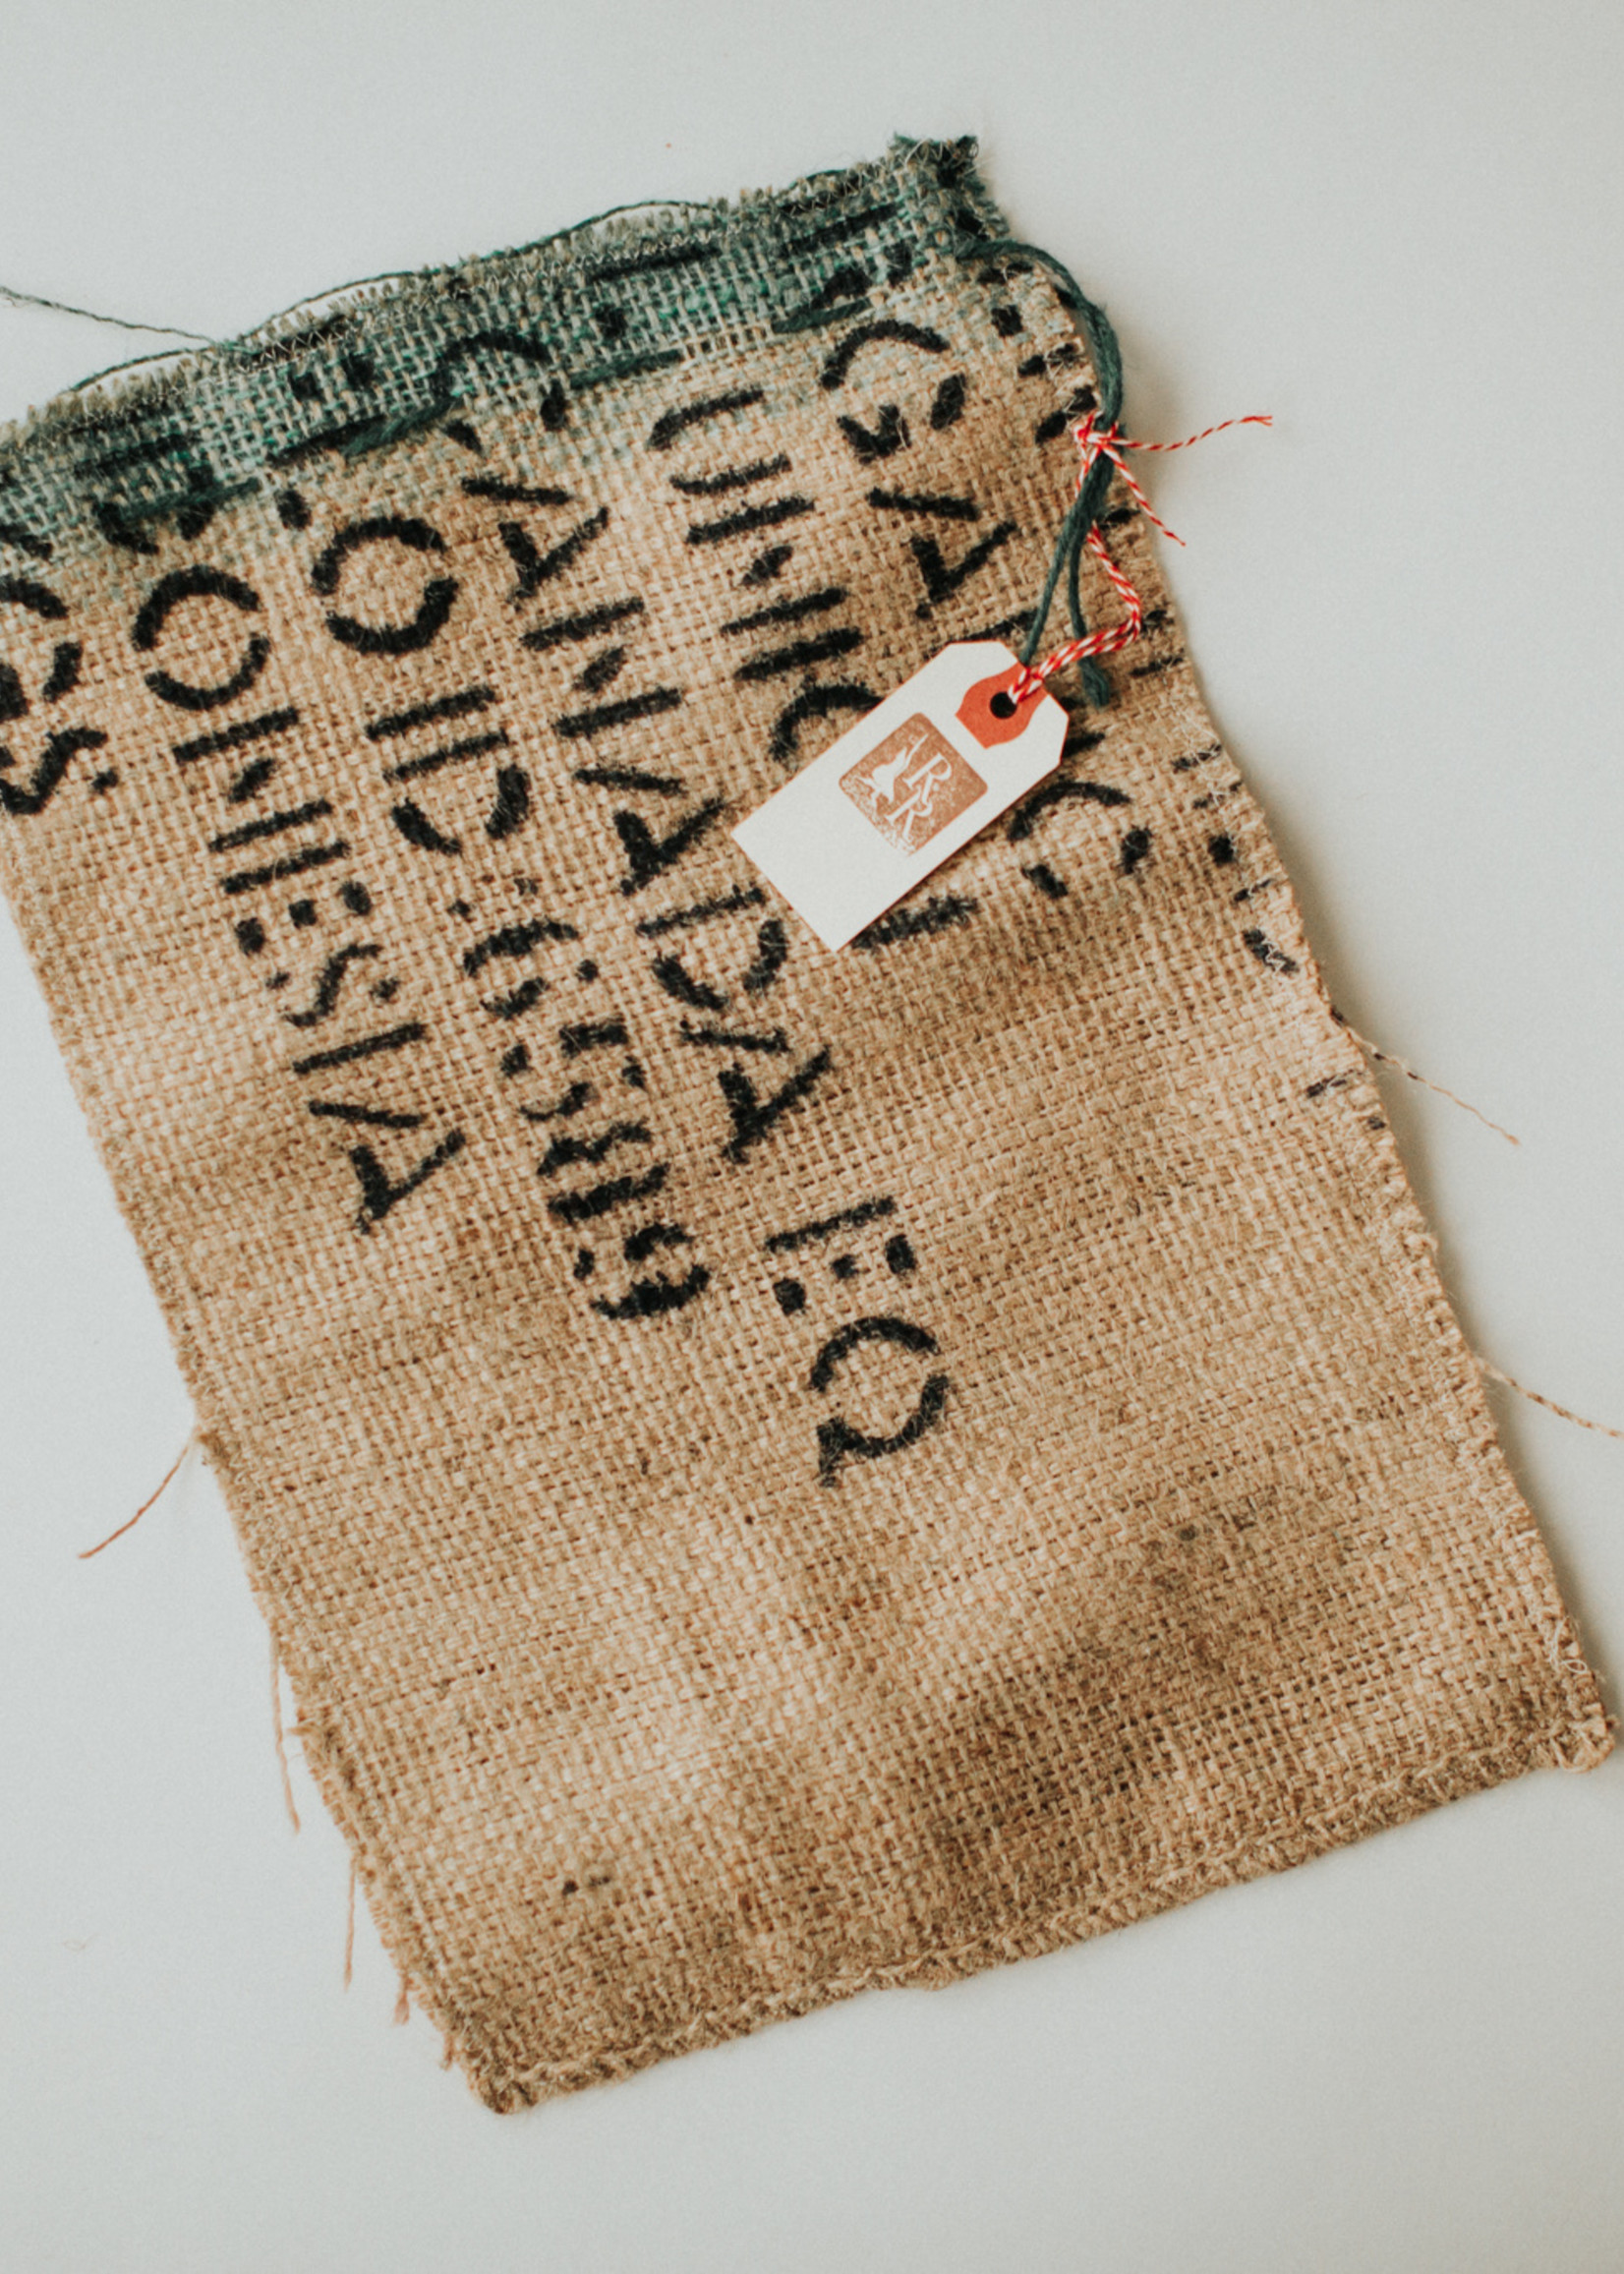 Up-cycled burlap gift bags